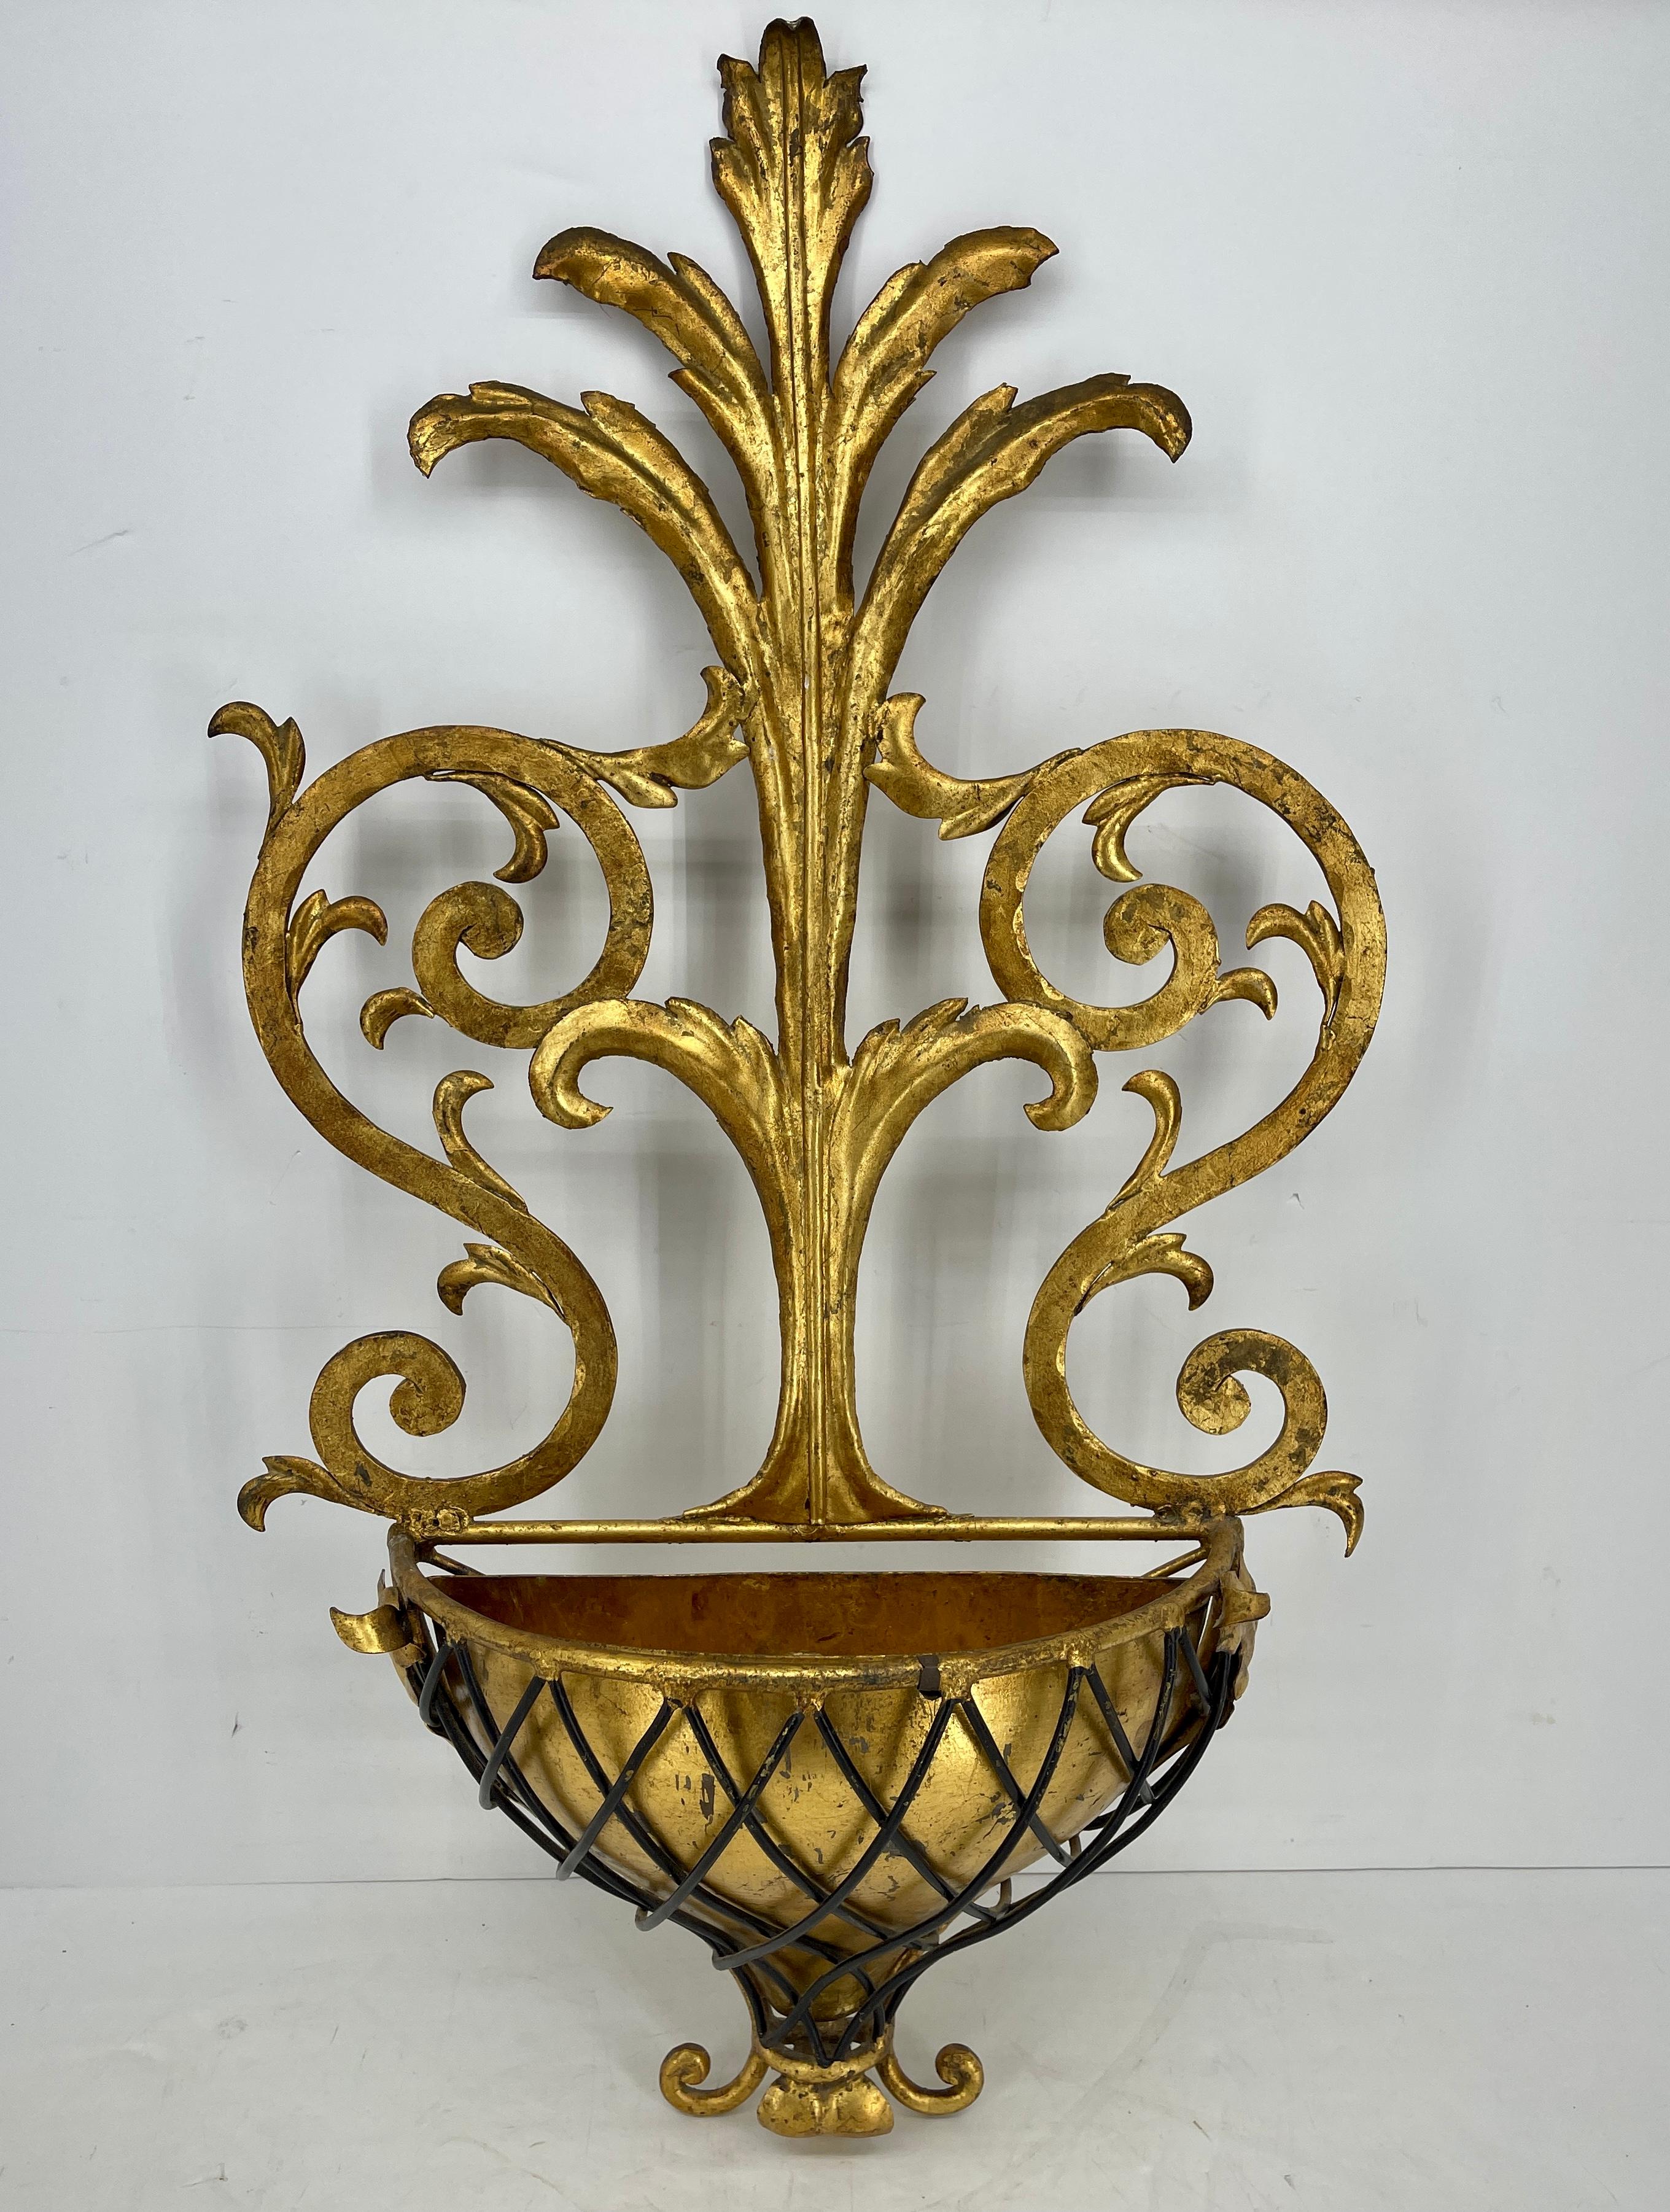 Mid-Century Modern gold gilt wall planter, Italy circa 1950's.
This beautiful wall planter cachepot is ornately scrolled with decorative black iron enhancing the demi-lune shaped plant holder in the center. The piece has an insert pot/basket to